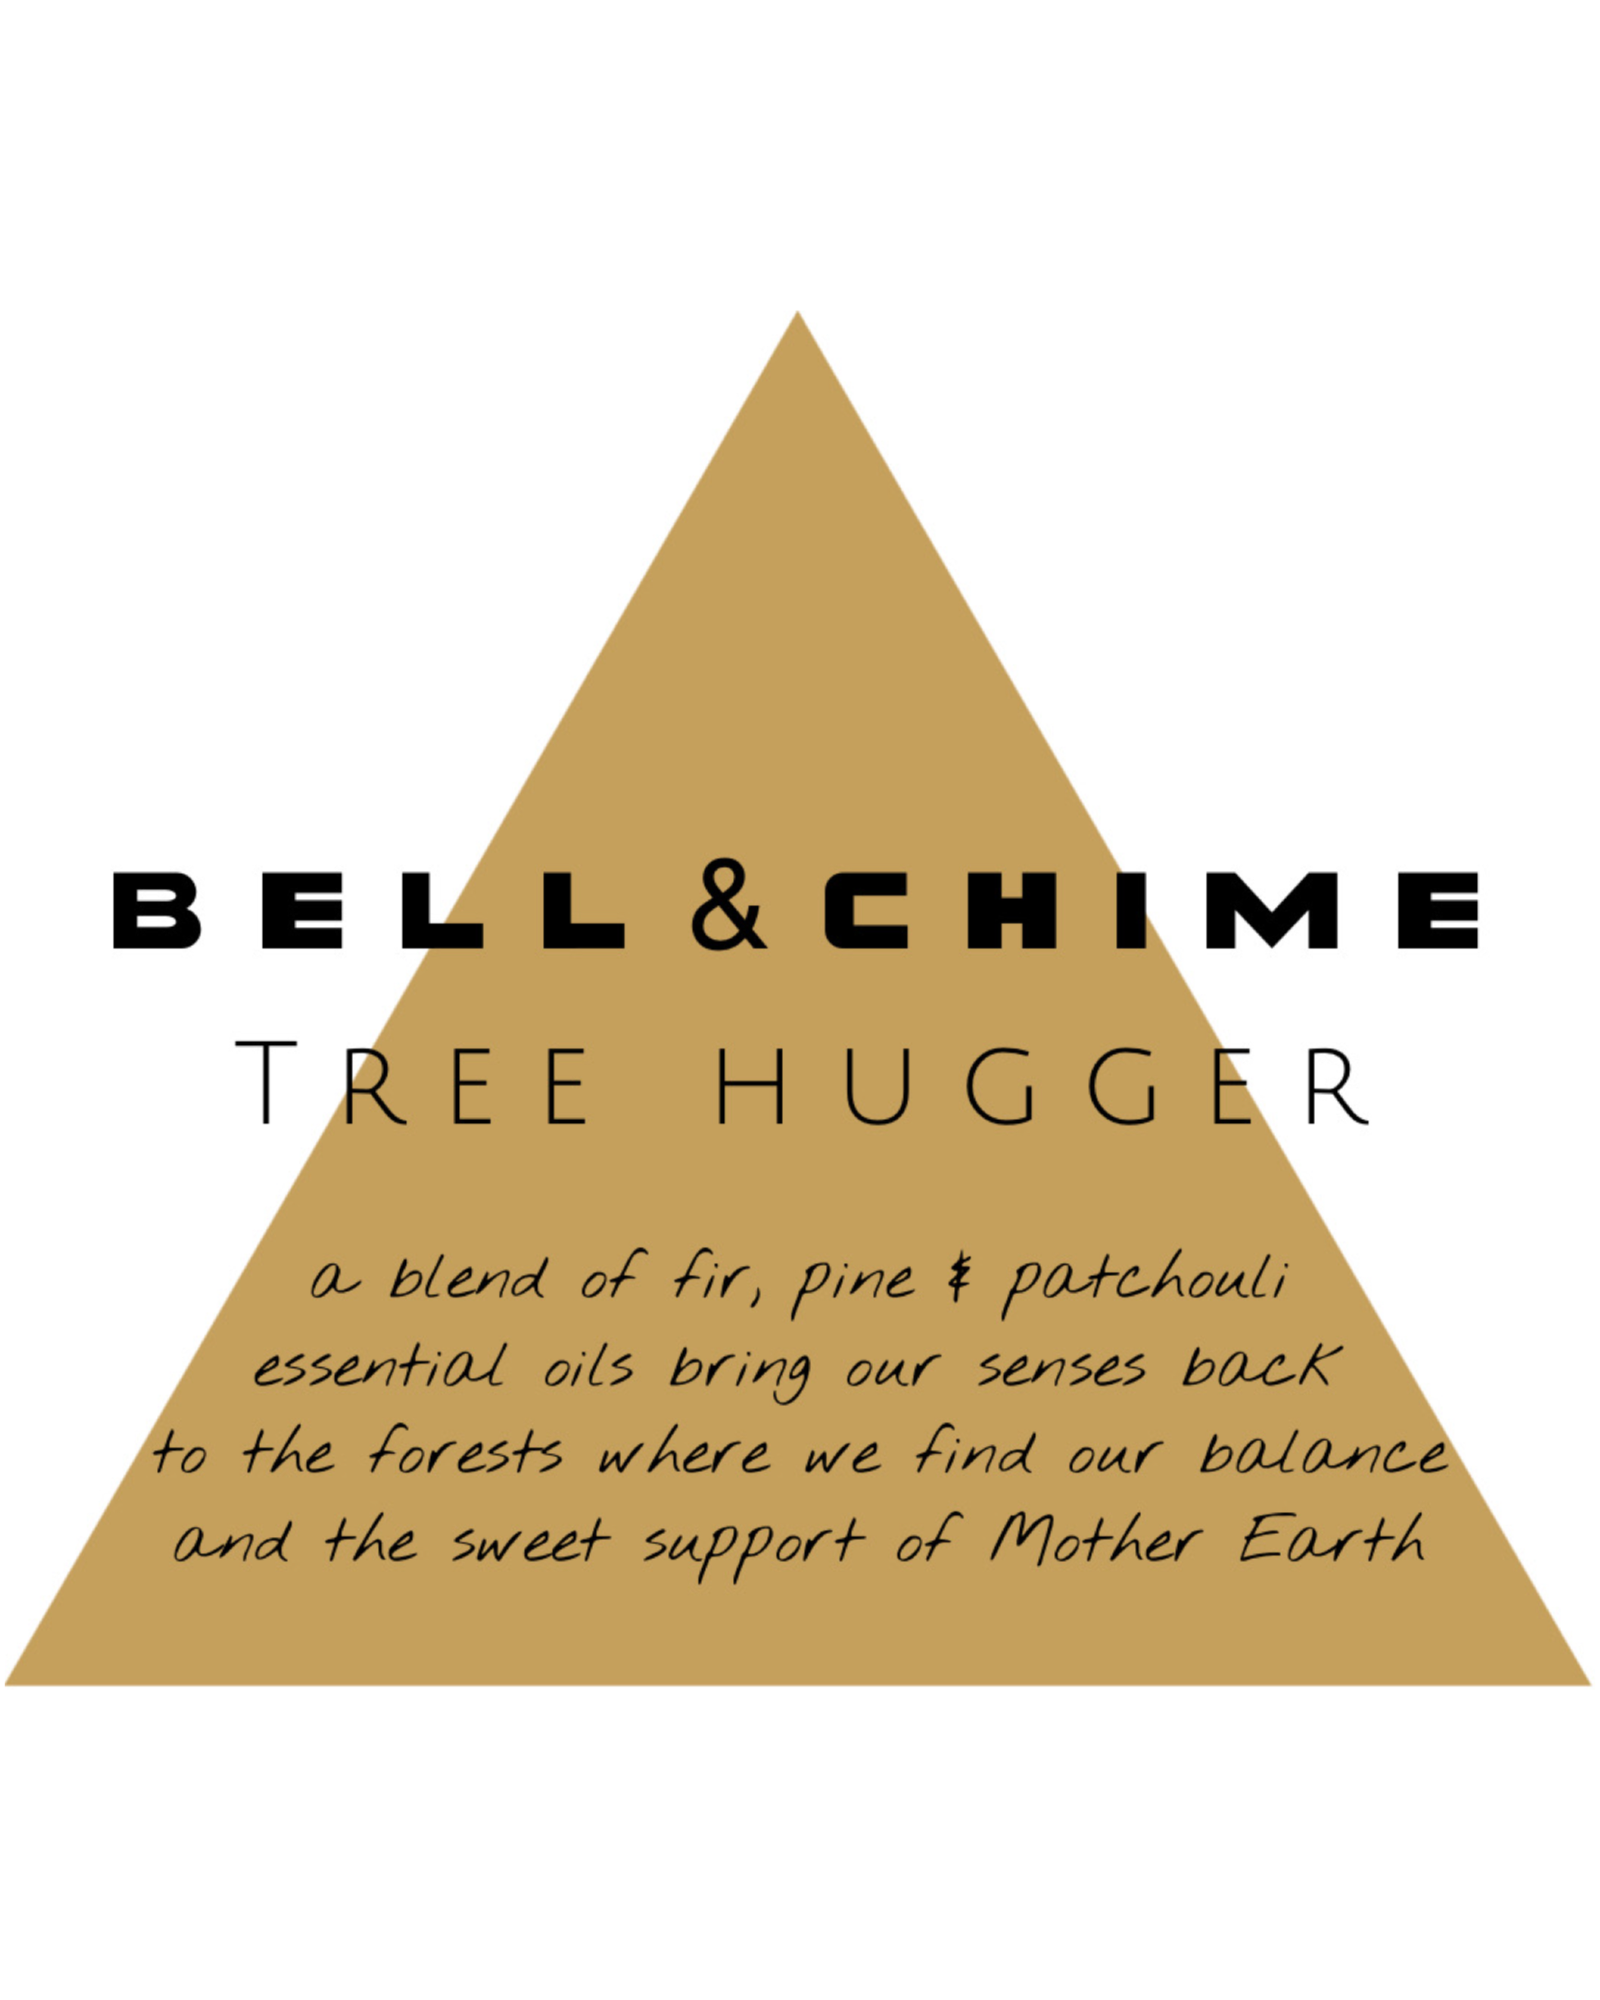 Bell & Chime "Tree Hugger" A blend of fir, pine and patchouli essential oils bring our senses back to the forests where we find our balance and the sweet support of Mother Earth.